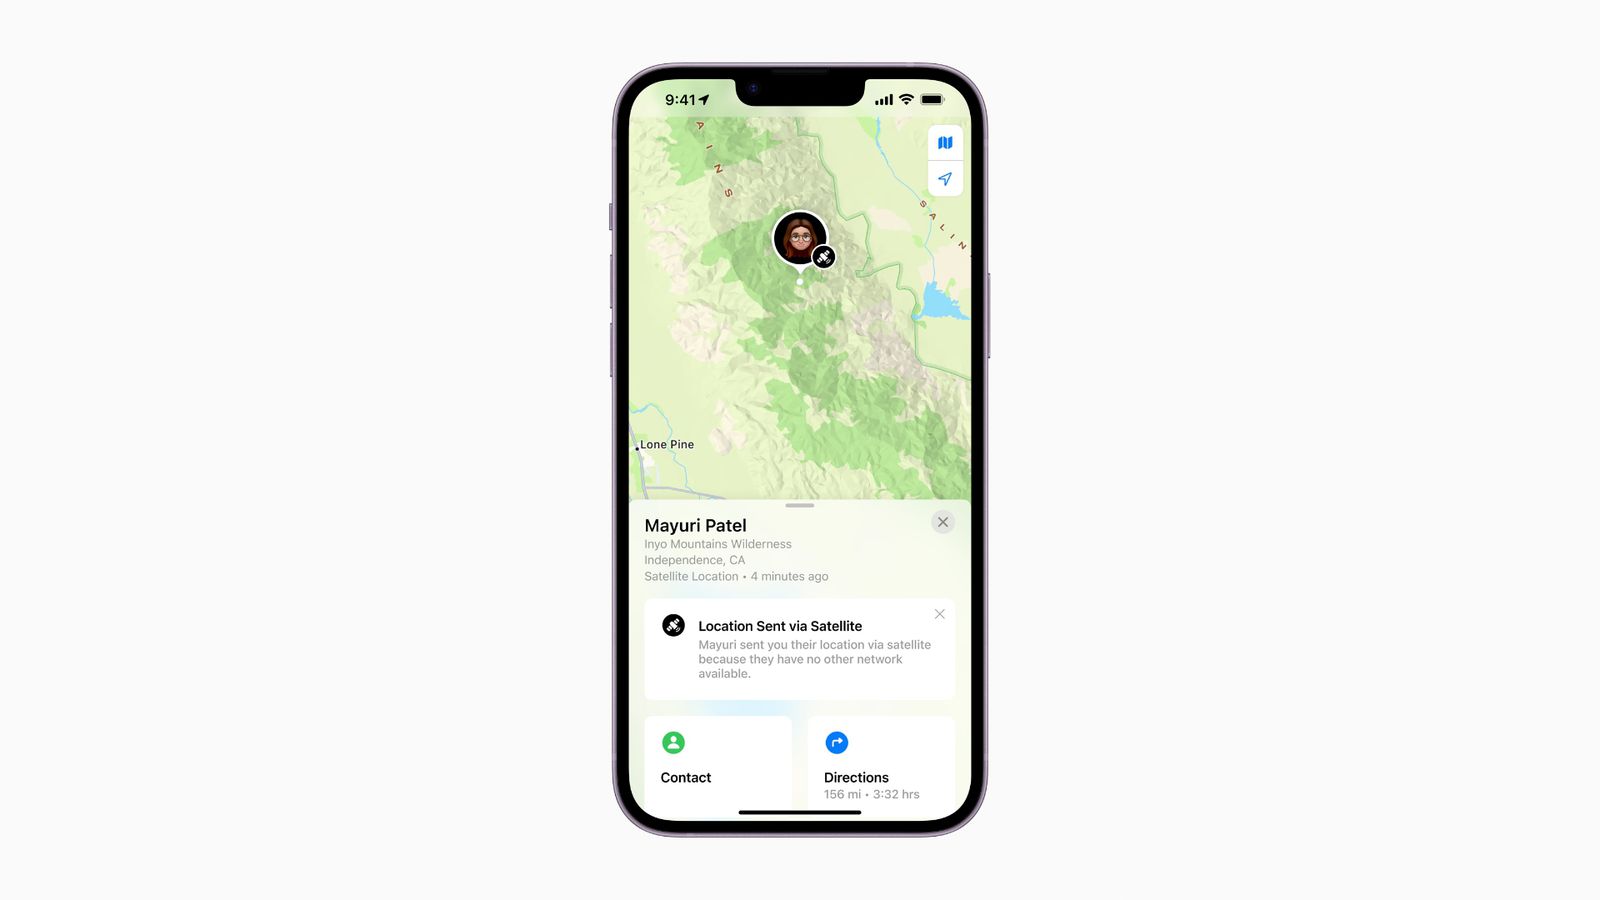 How to Share Your Location via Satellite With Find My